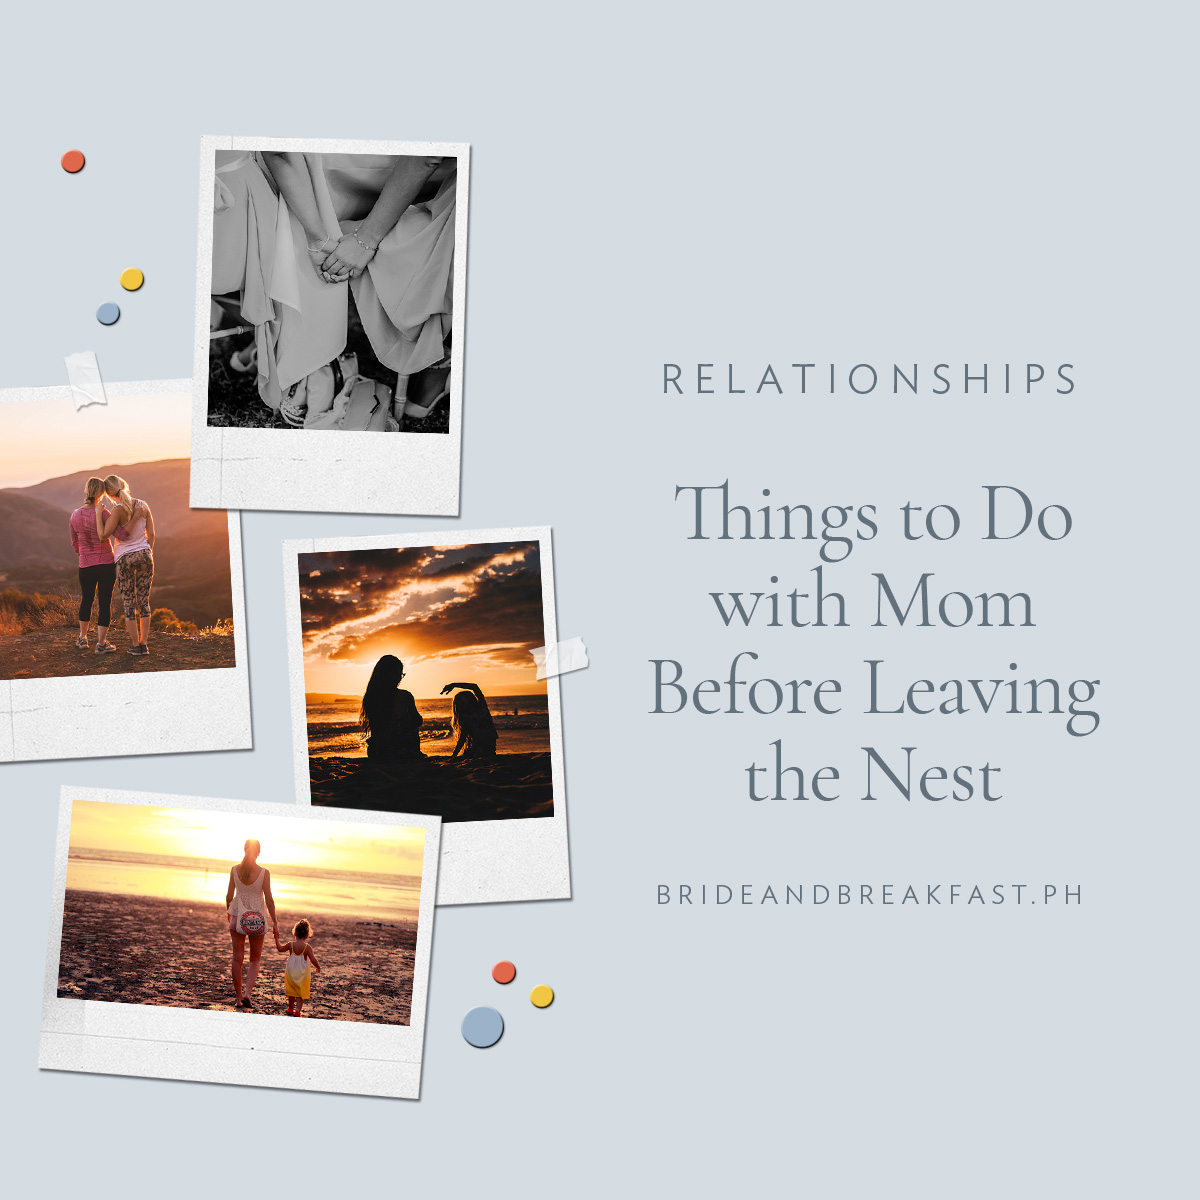 10 Things to Do with Mom Before Leaving the Nest